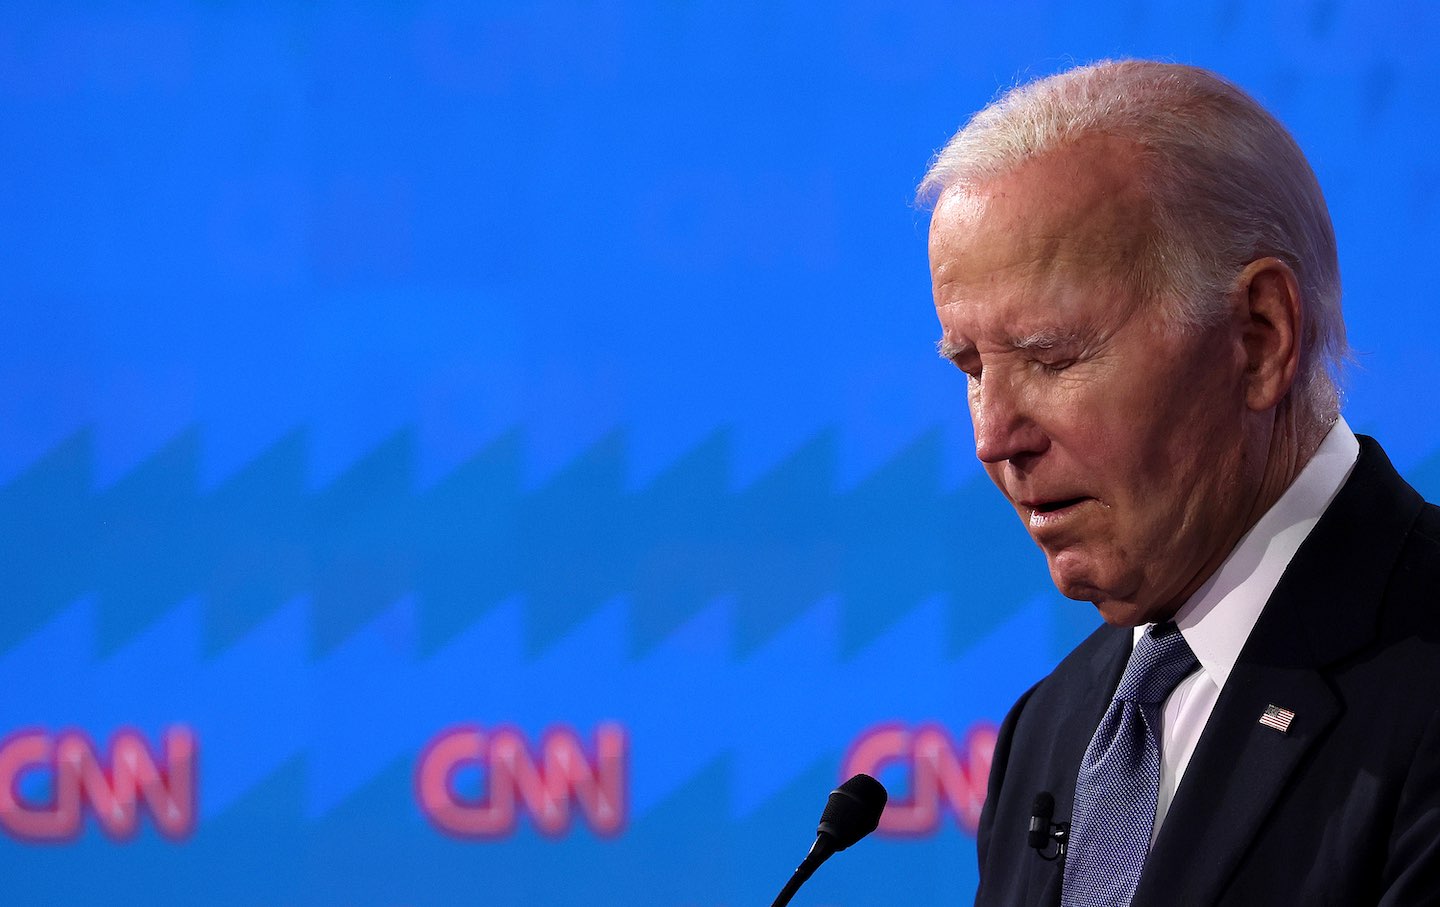 Biden’s Record Won’t Win Him the Election if He Can’t Make Sense for 2 Minutes at a Time